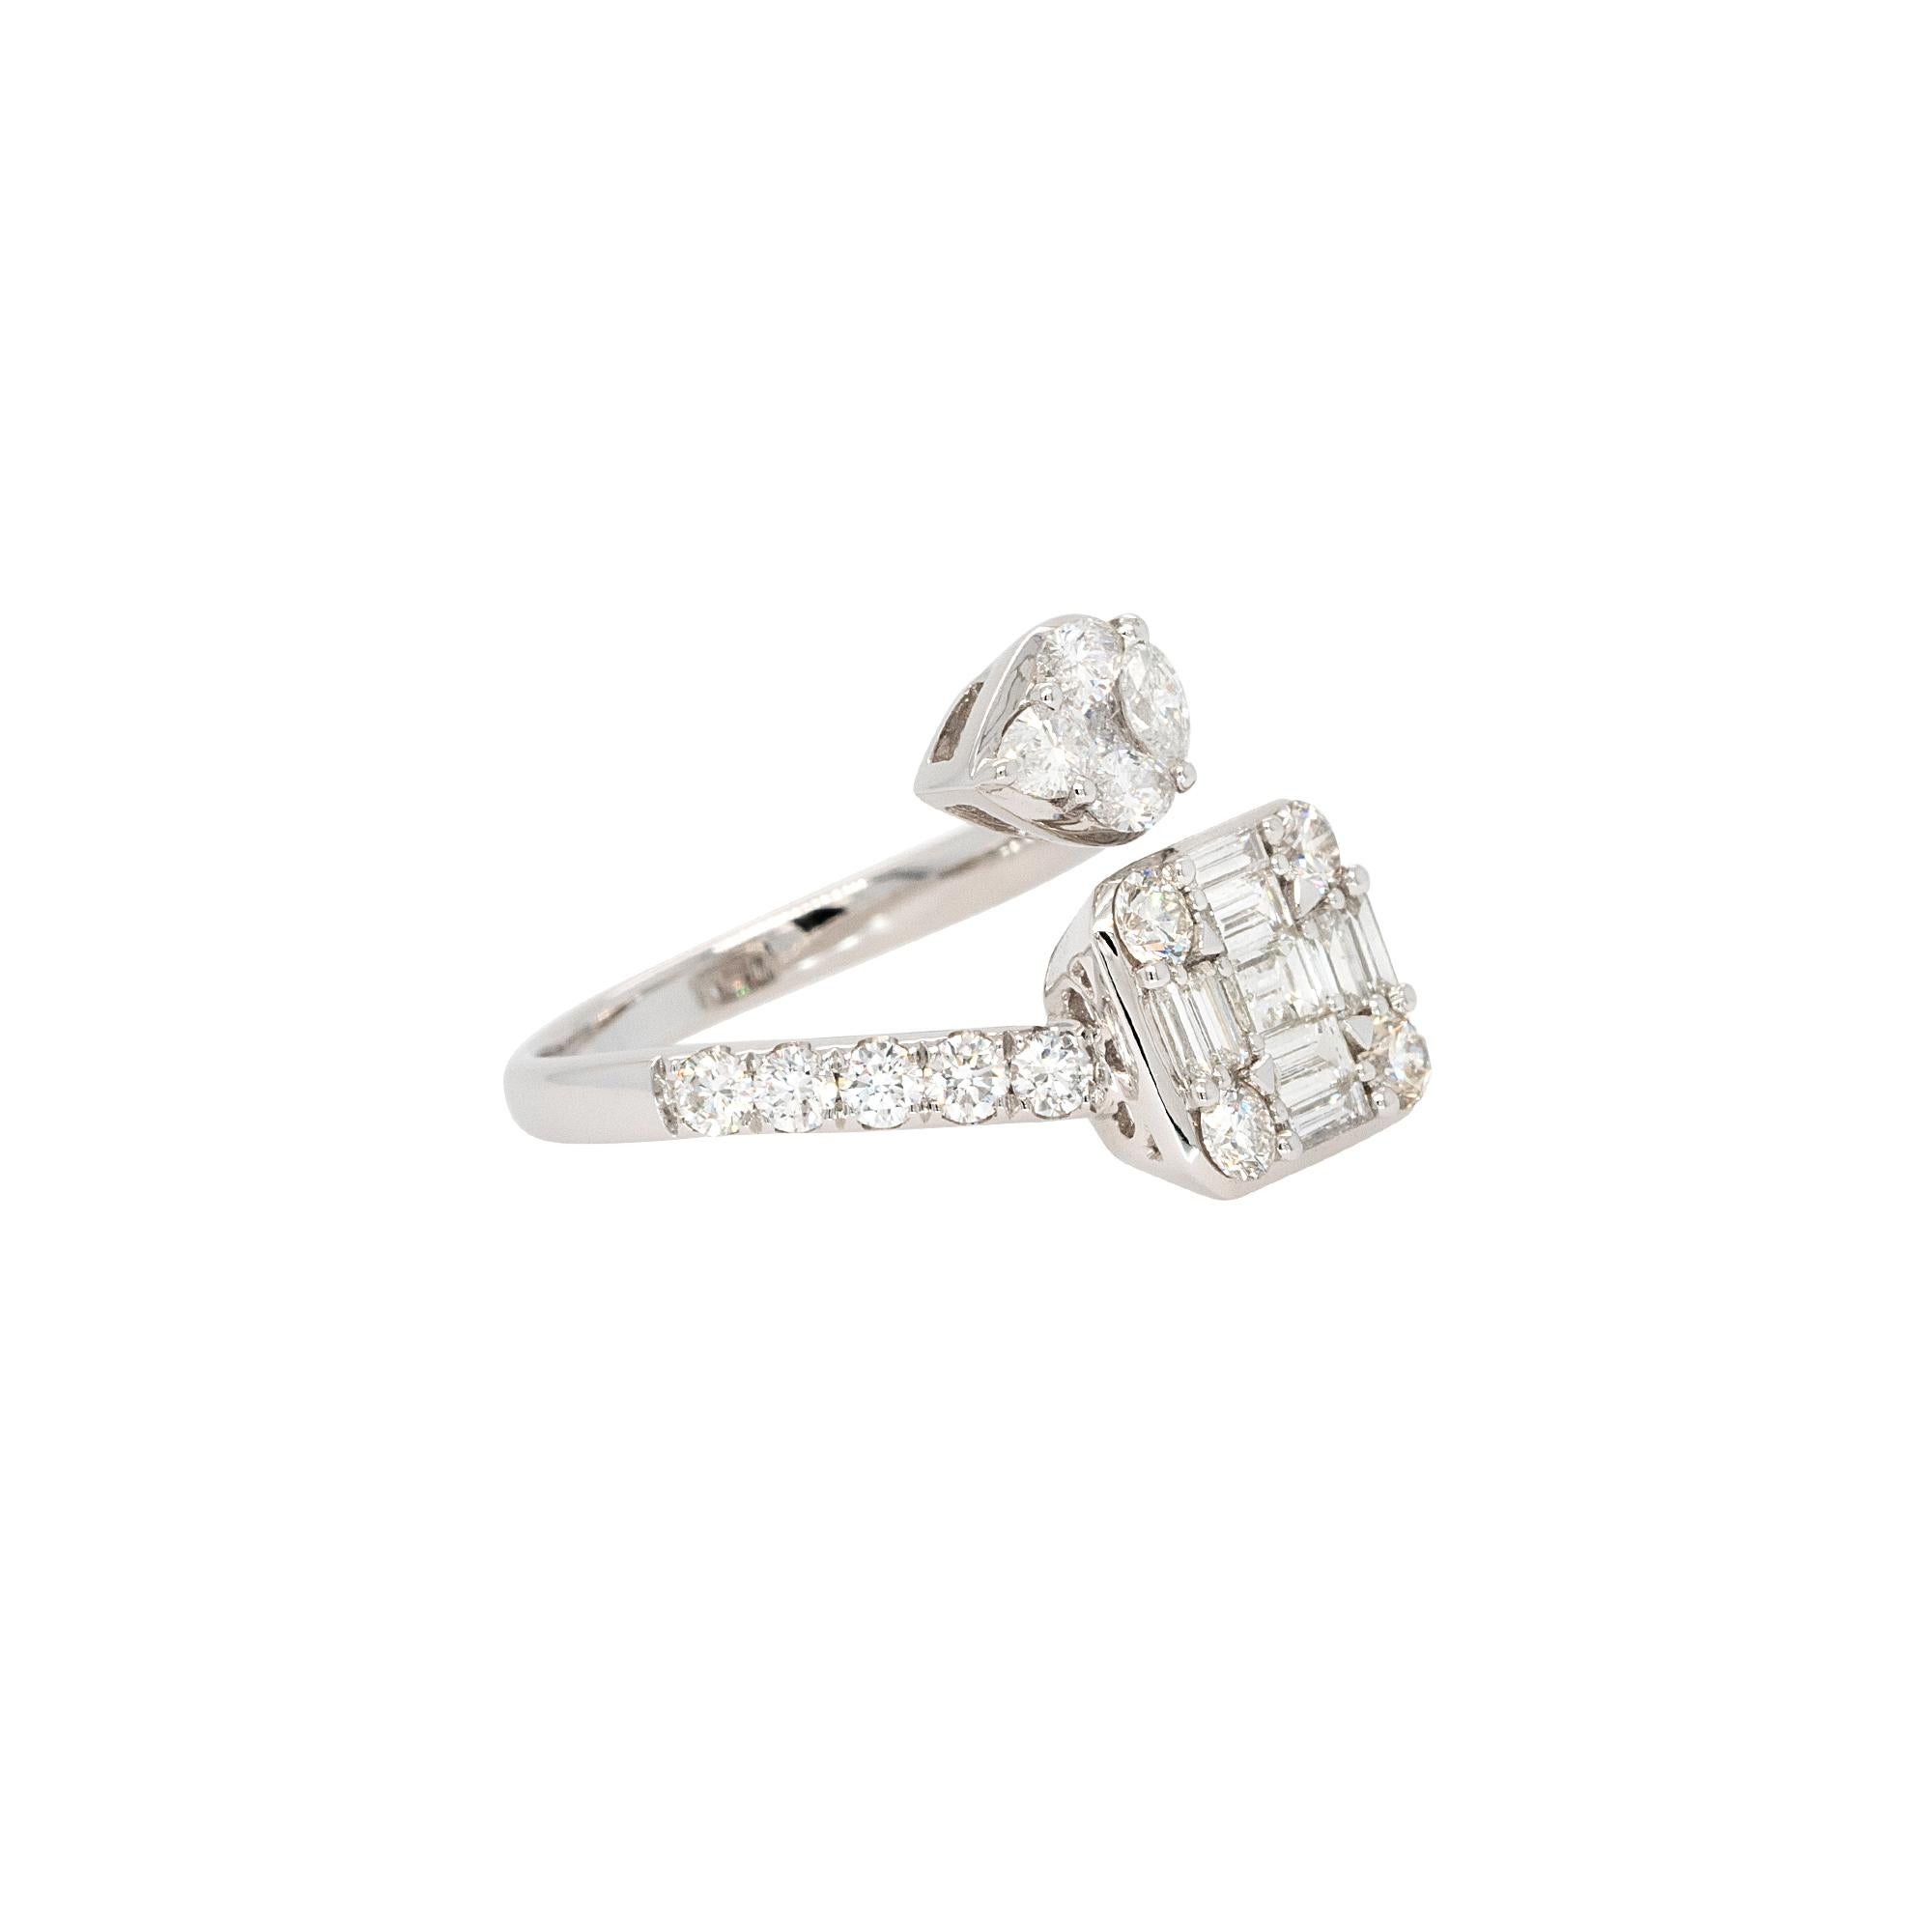 Diamond Details:
0.53ct Baguette Cut Natural Diamond
0.78ct Round Brilliant Natural Diamond
0.41ct Mixed Cut Natural Diamonds
G Color VS Clarity
Ring Material: 18k White Gold
Ring Size: 6.5 (can be sized)
Measurements: 15.9mm x 5.0mm
Total Weight: